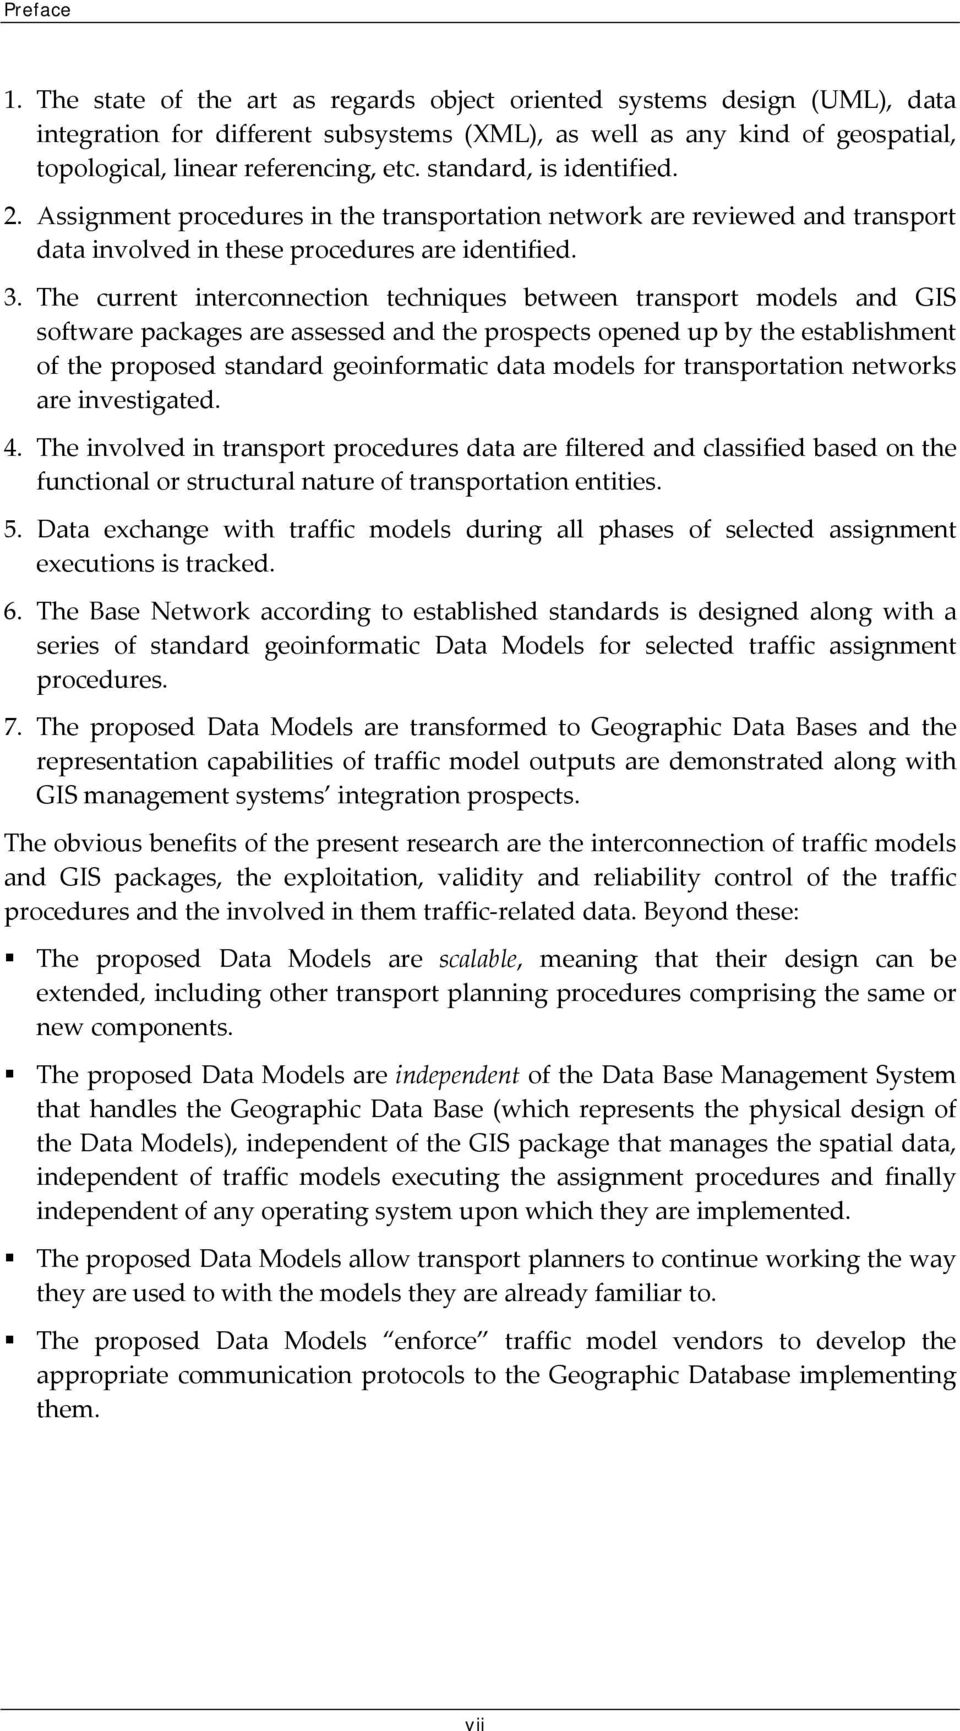 standard, is identified. 2. Assignment procedures in the transportation network are reviewed and transport data involved in these procedures are identified. 3.